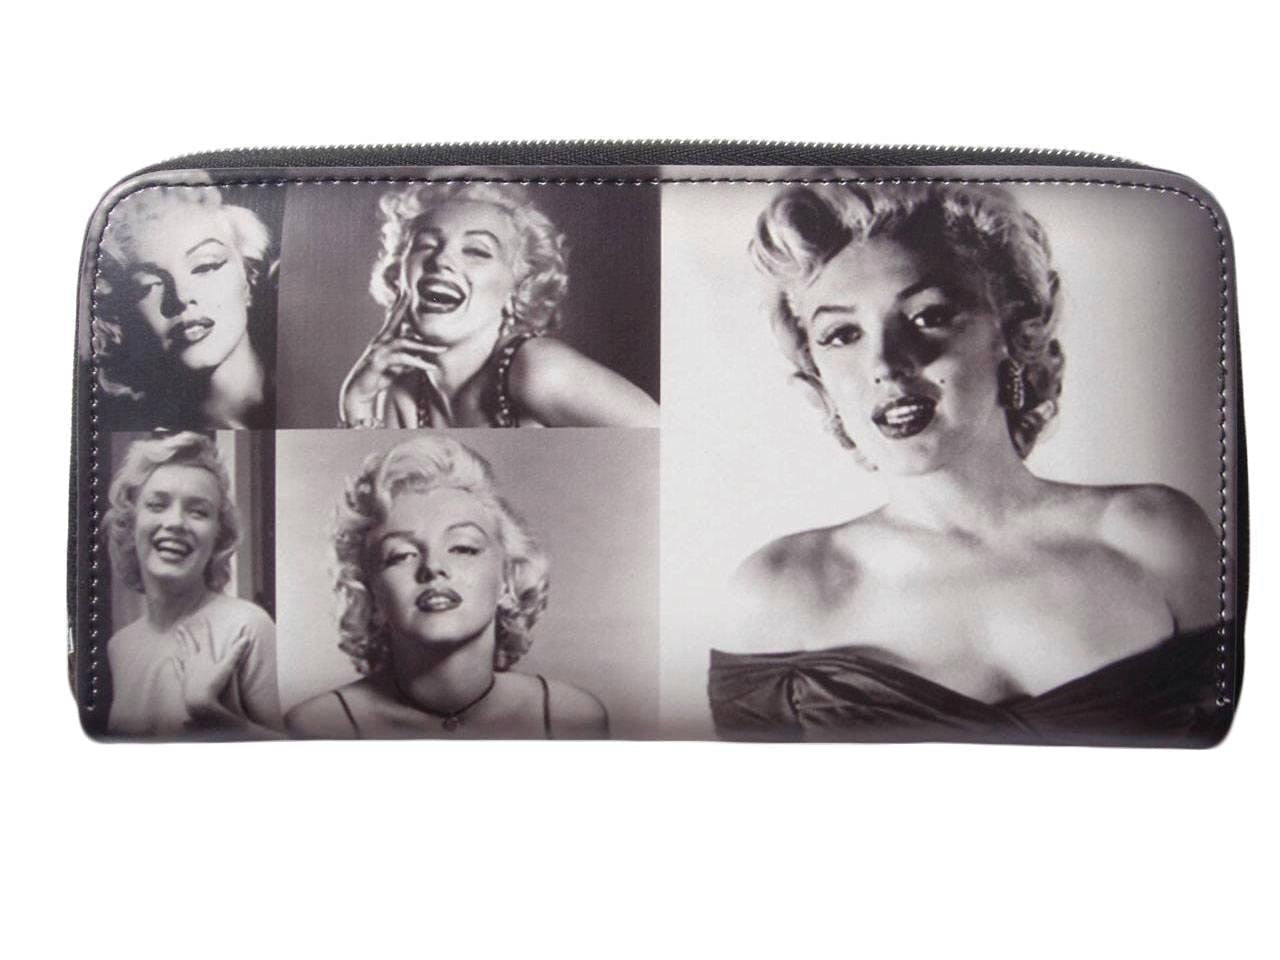 Marilyn Monroe Retro Rare Picture Collage ID Coin Bill Holder Wallet - SilverMania925